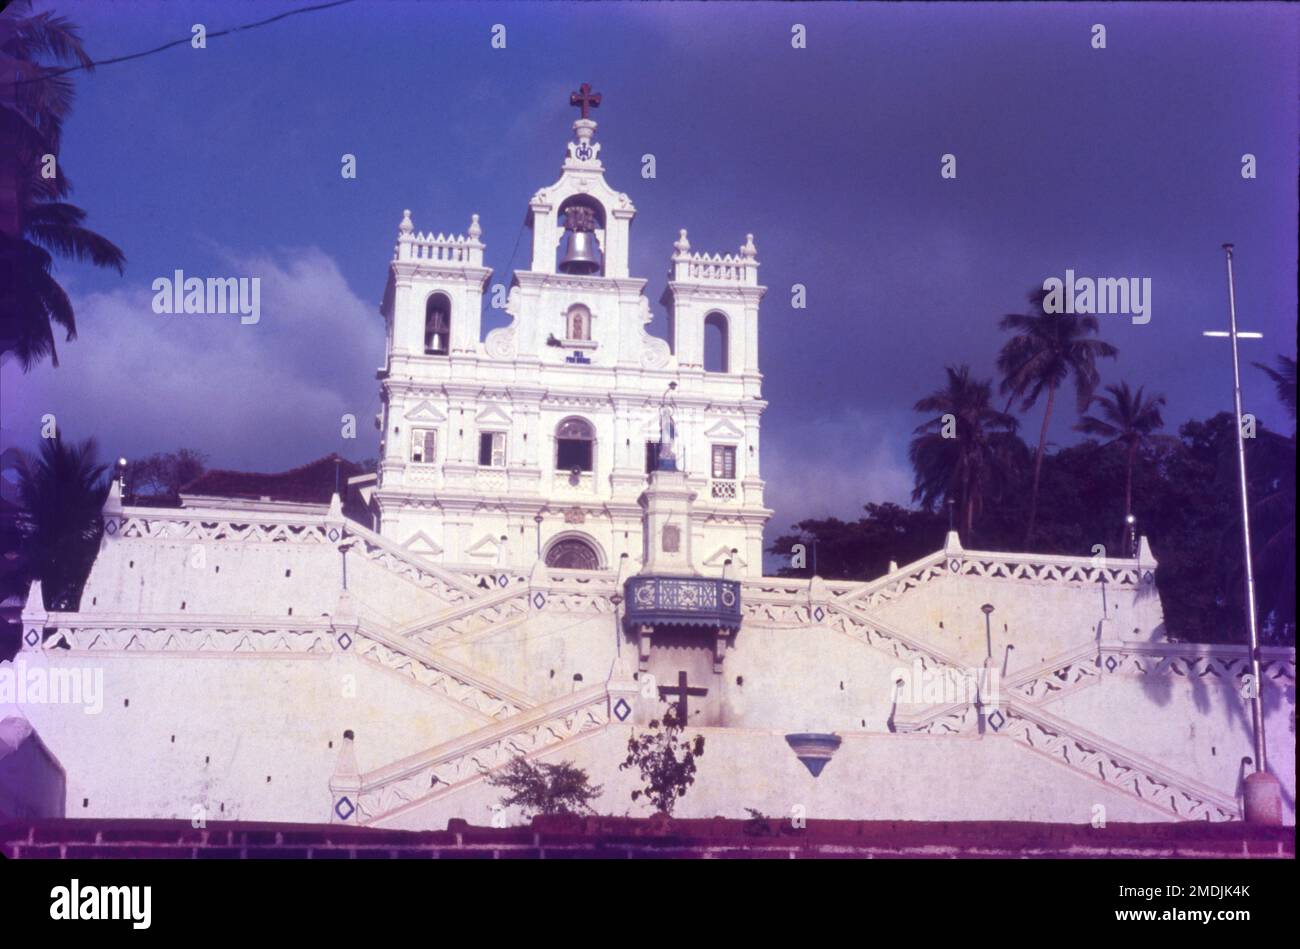 The Our Lady of the Immaculate Conception Church is located in Panjim, Goa, India. The colonial Portuguese Baroque style church was first built in 1541 as a chapel on a hill side overlooking the city of Panjim. The white sparkling church is majorly famed for its architecture and its flight of stairs that zigzag to the top. Another attraction of the church is the Augustinian Bell located in the belfry, which also the second largest bell in Goa. Built in a Portuguese Baroque style, the church is located on a slight elevation, on a hillock. Stock Photo